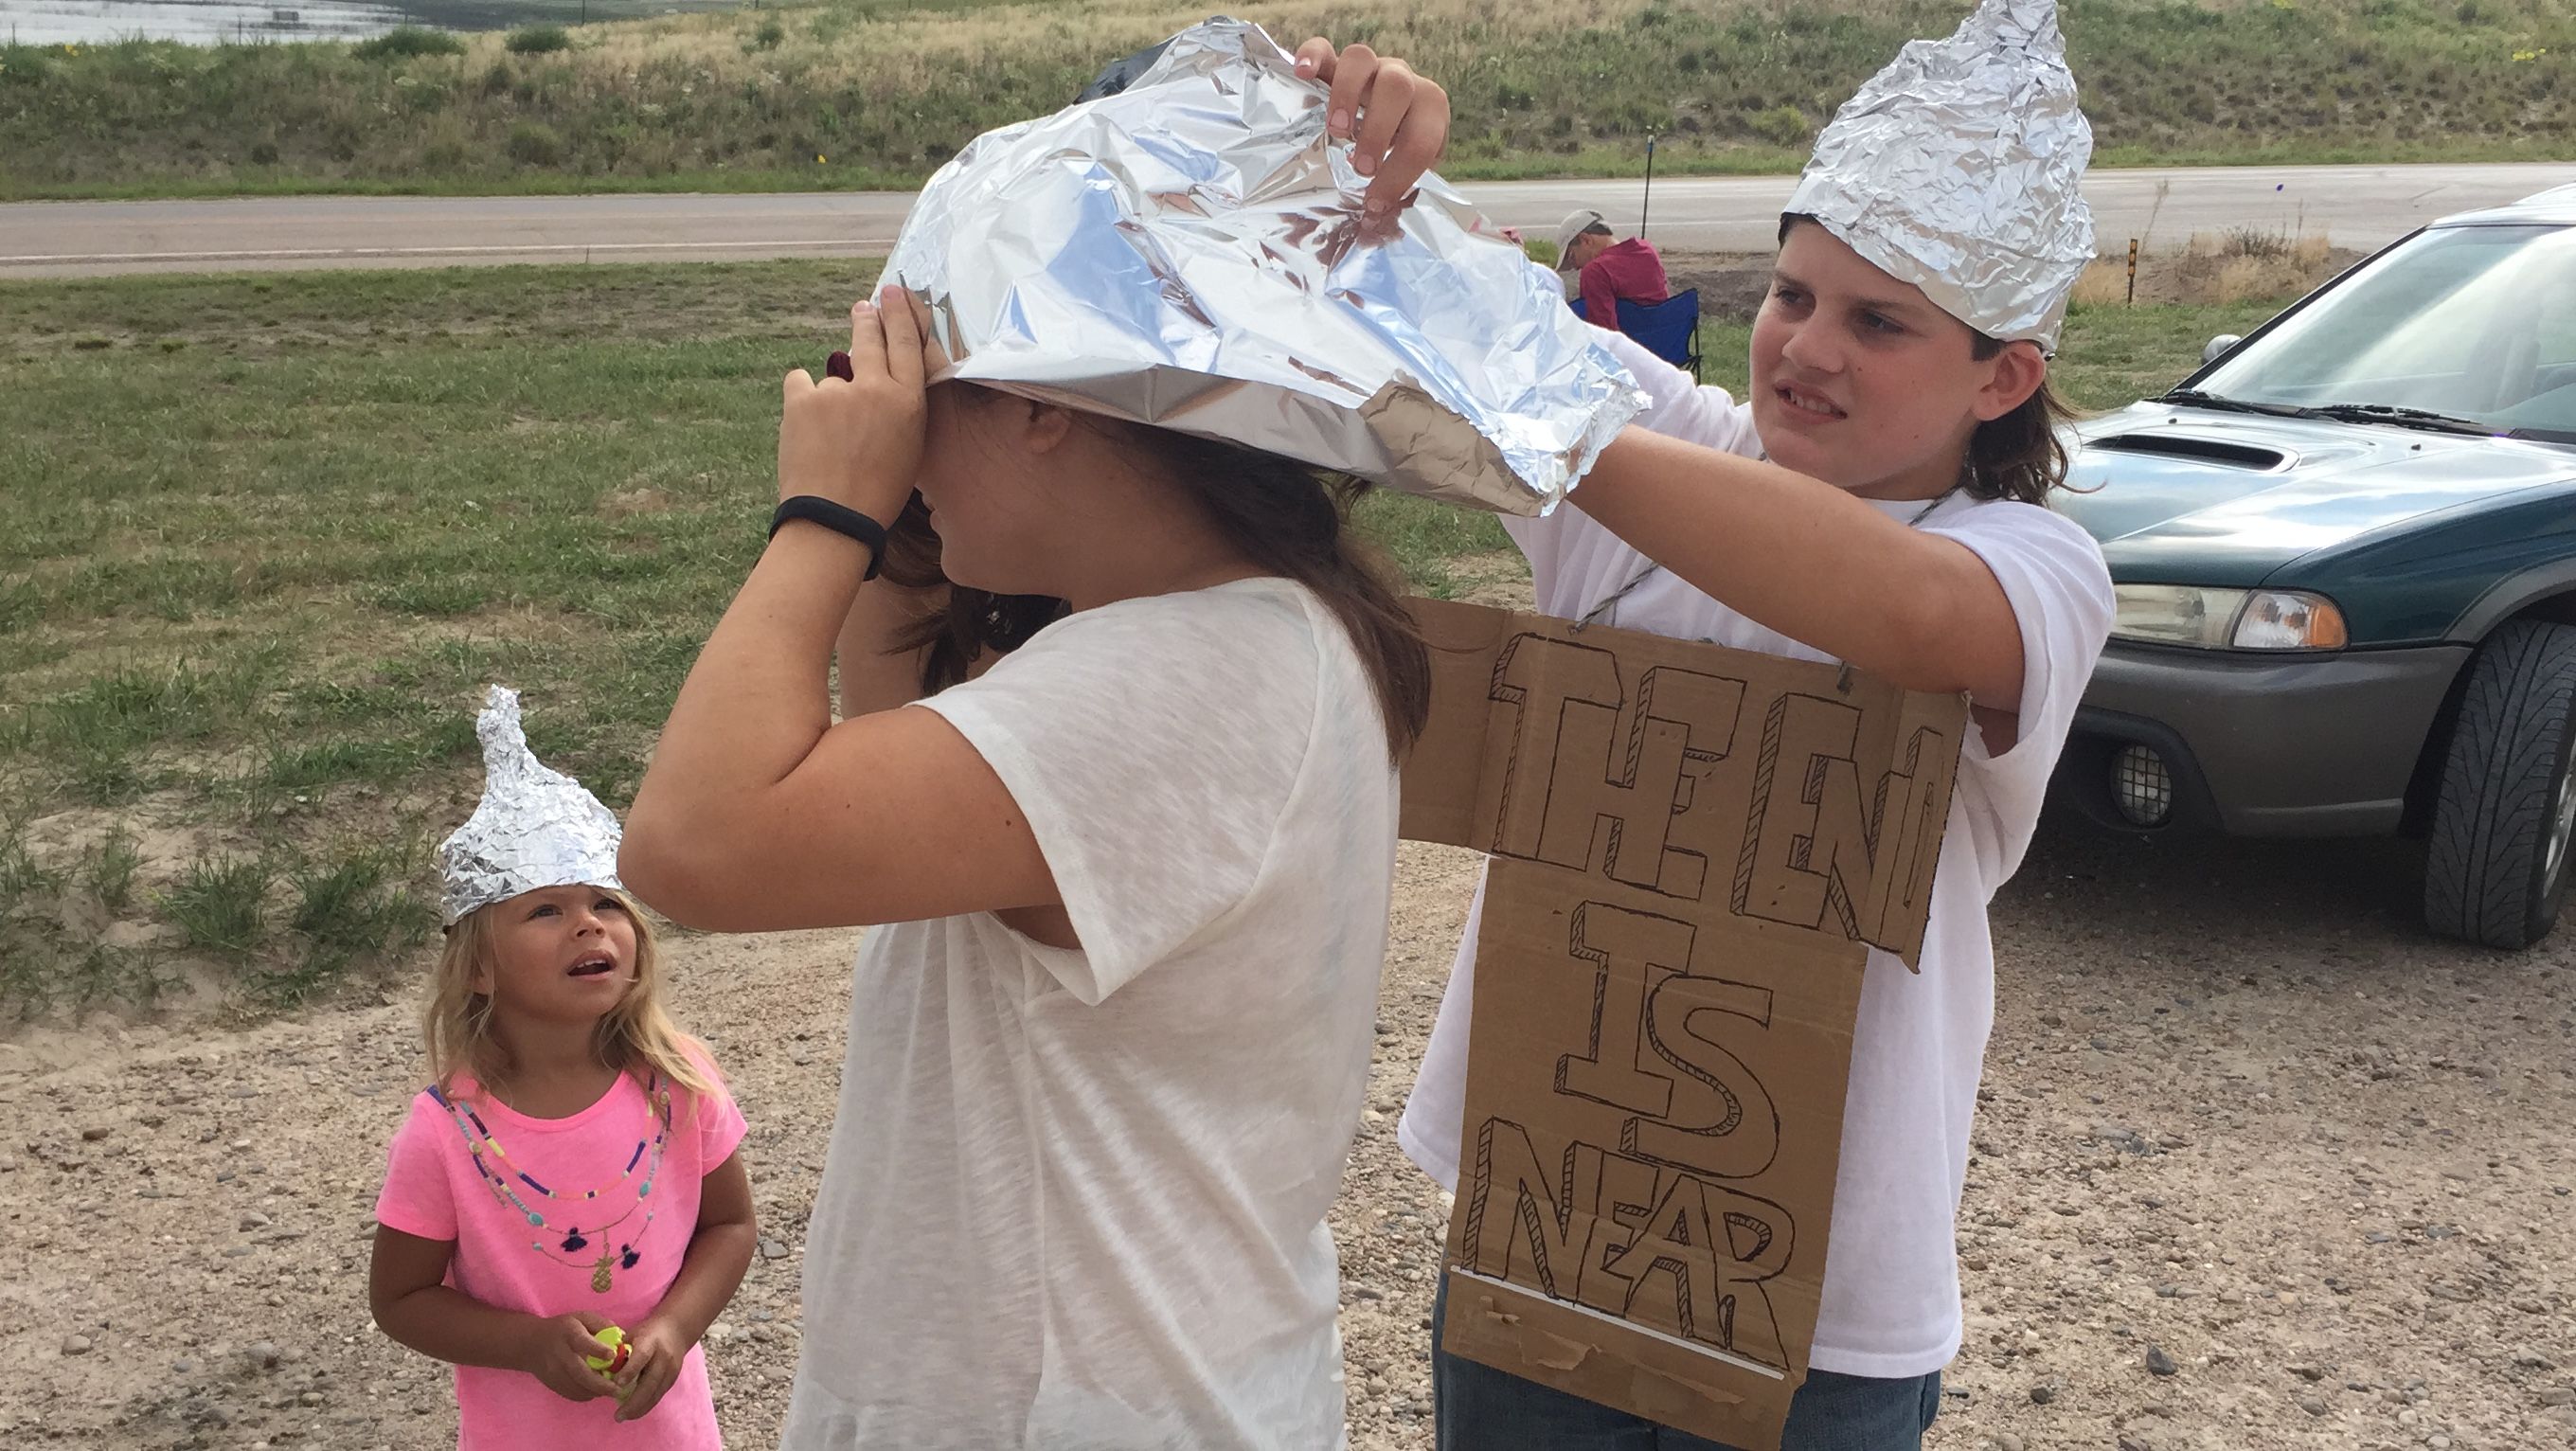 This kid at a gas station in Nebraska was giving out "Free solar hats to protect you from the UV radiation."